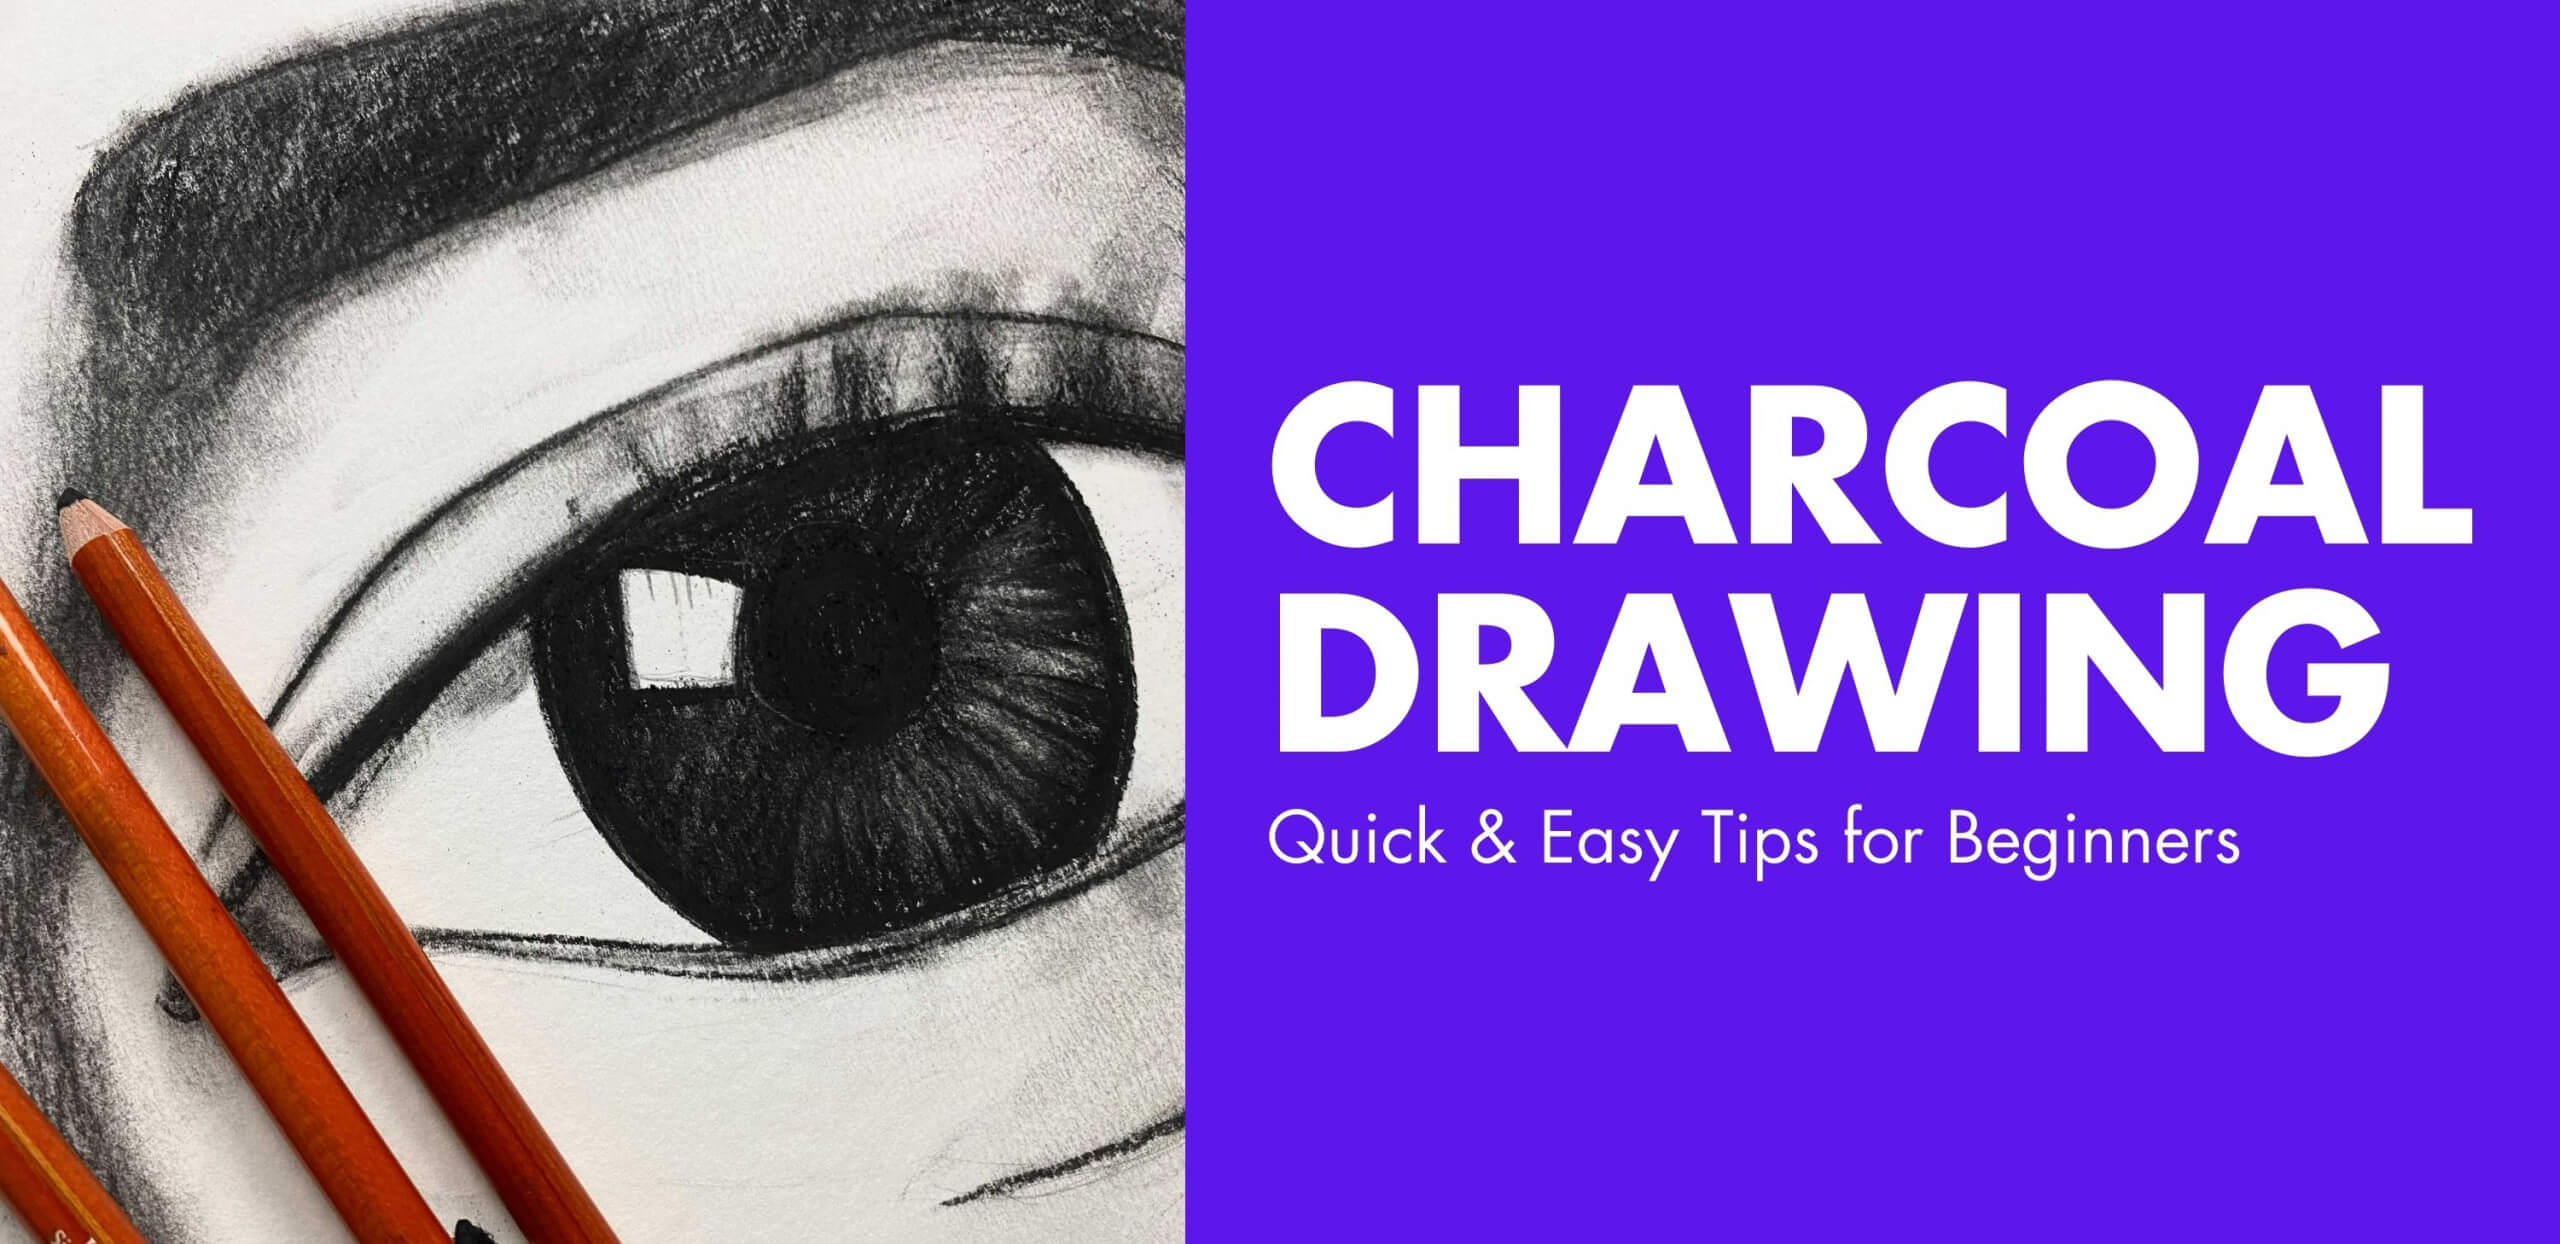 Charcoal Drawing for Beginners